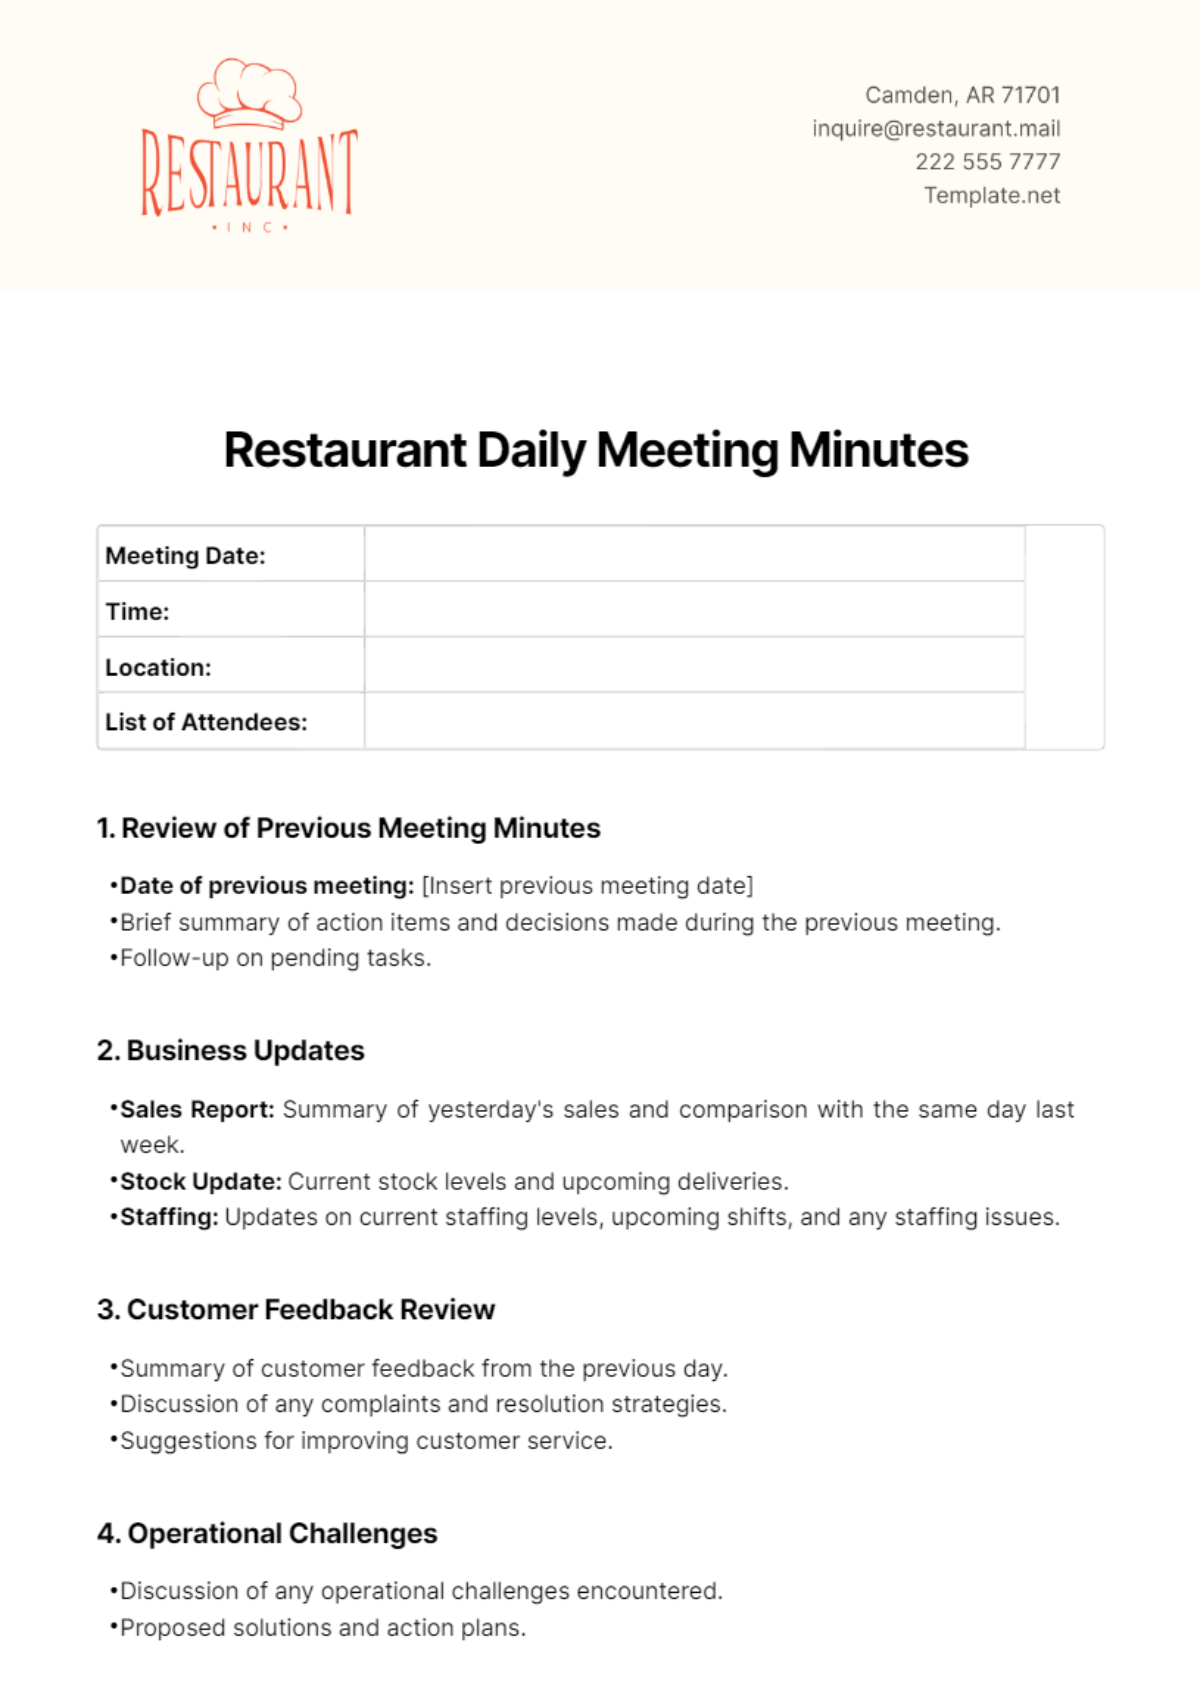 Free Restaurant Daily Meeting Minutes Template